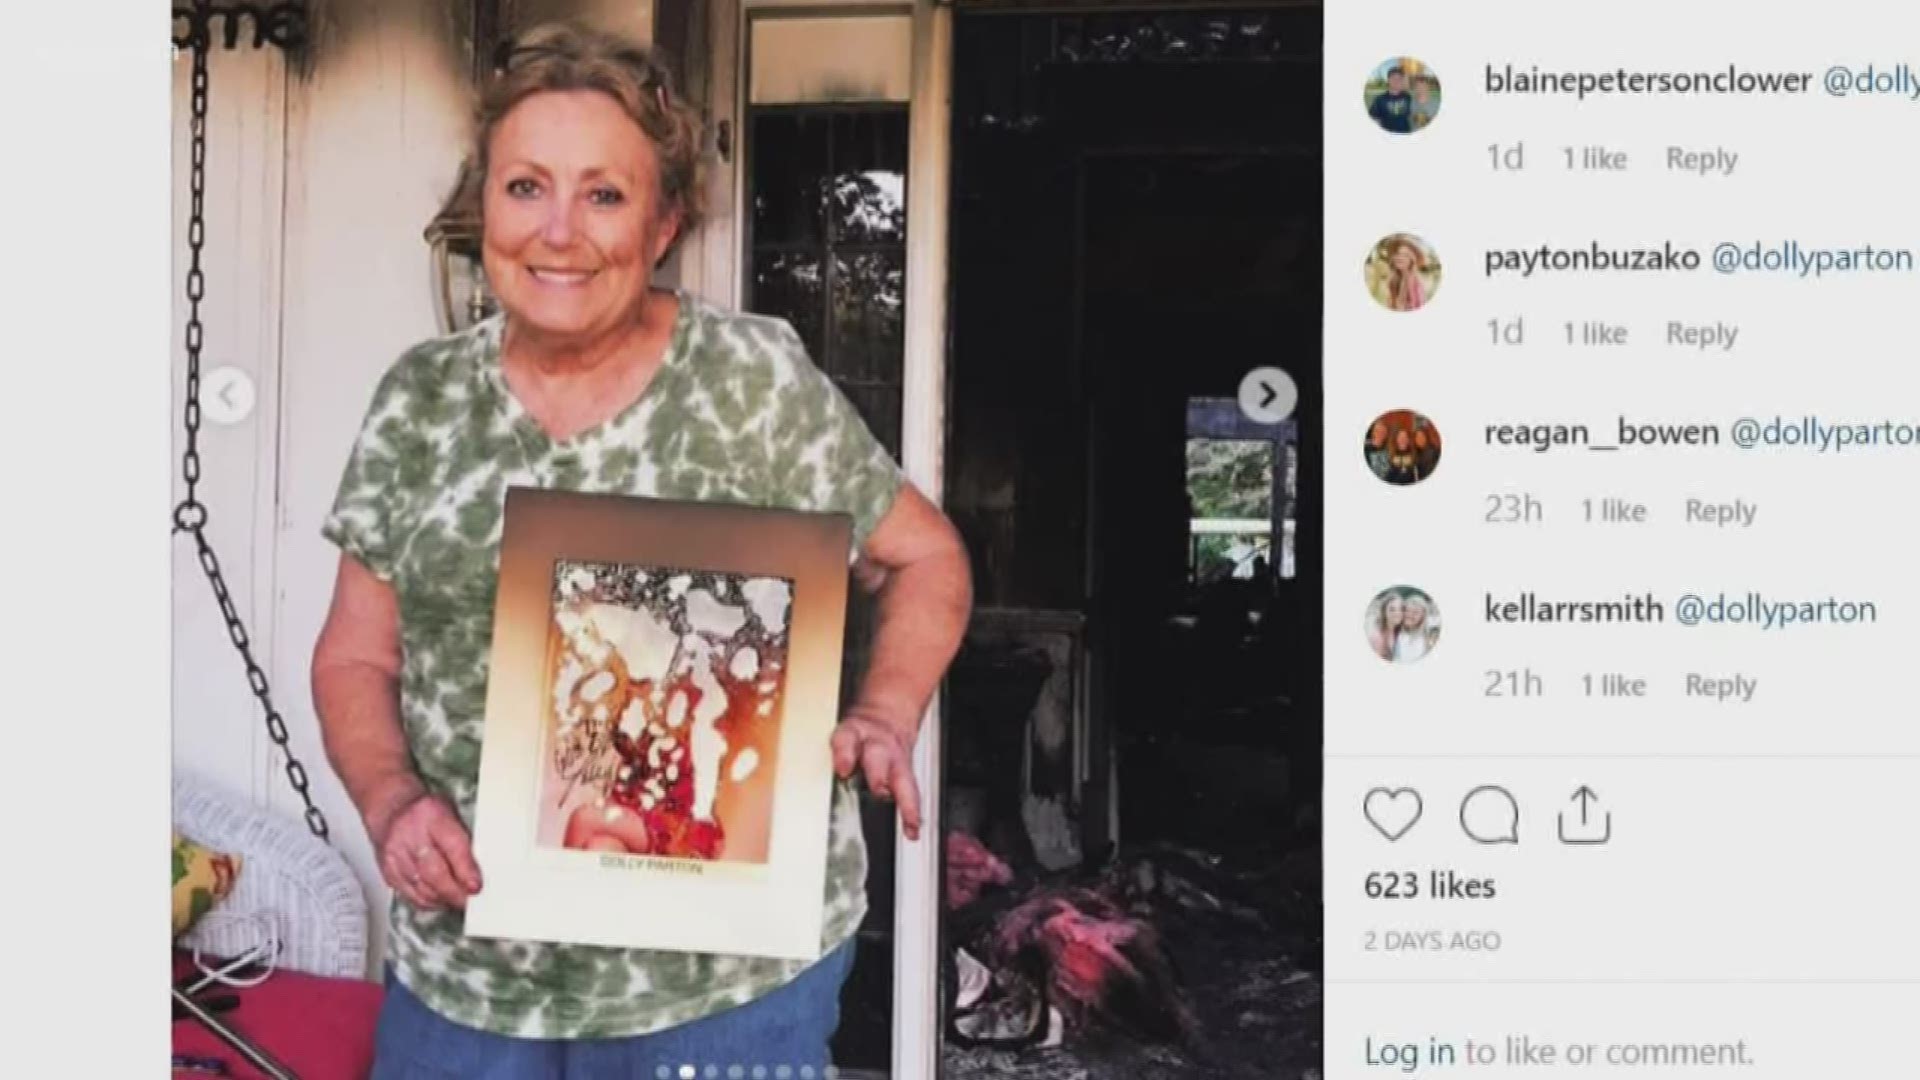 One Farragut woman lost her home in a fire. Nearly a week later, she's left sorting through her fondest memories.